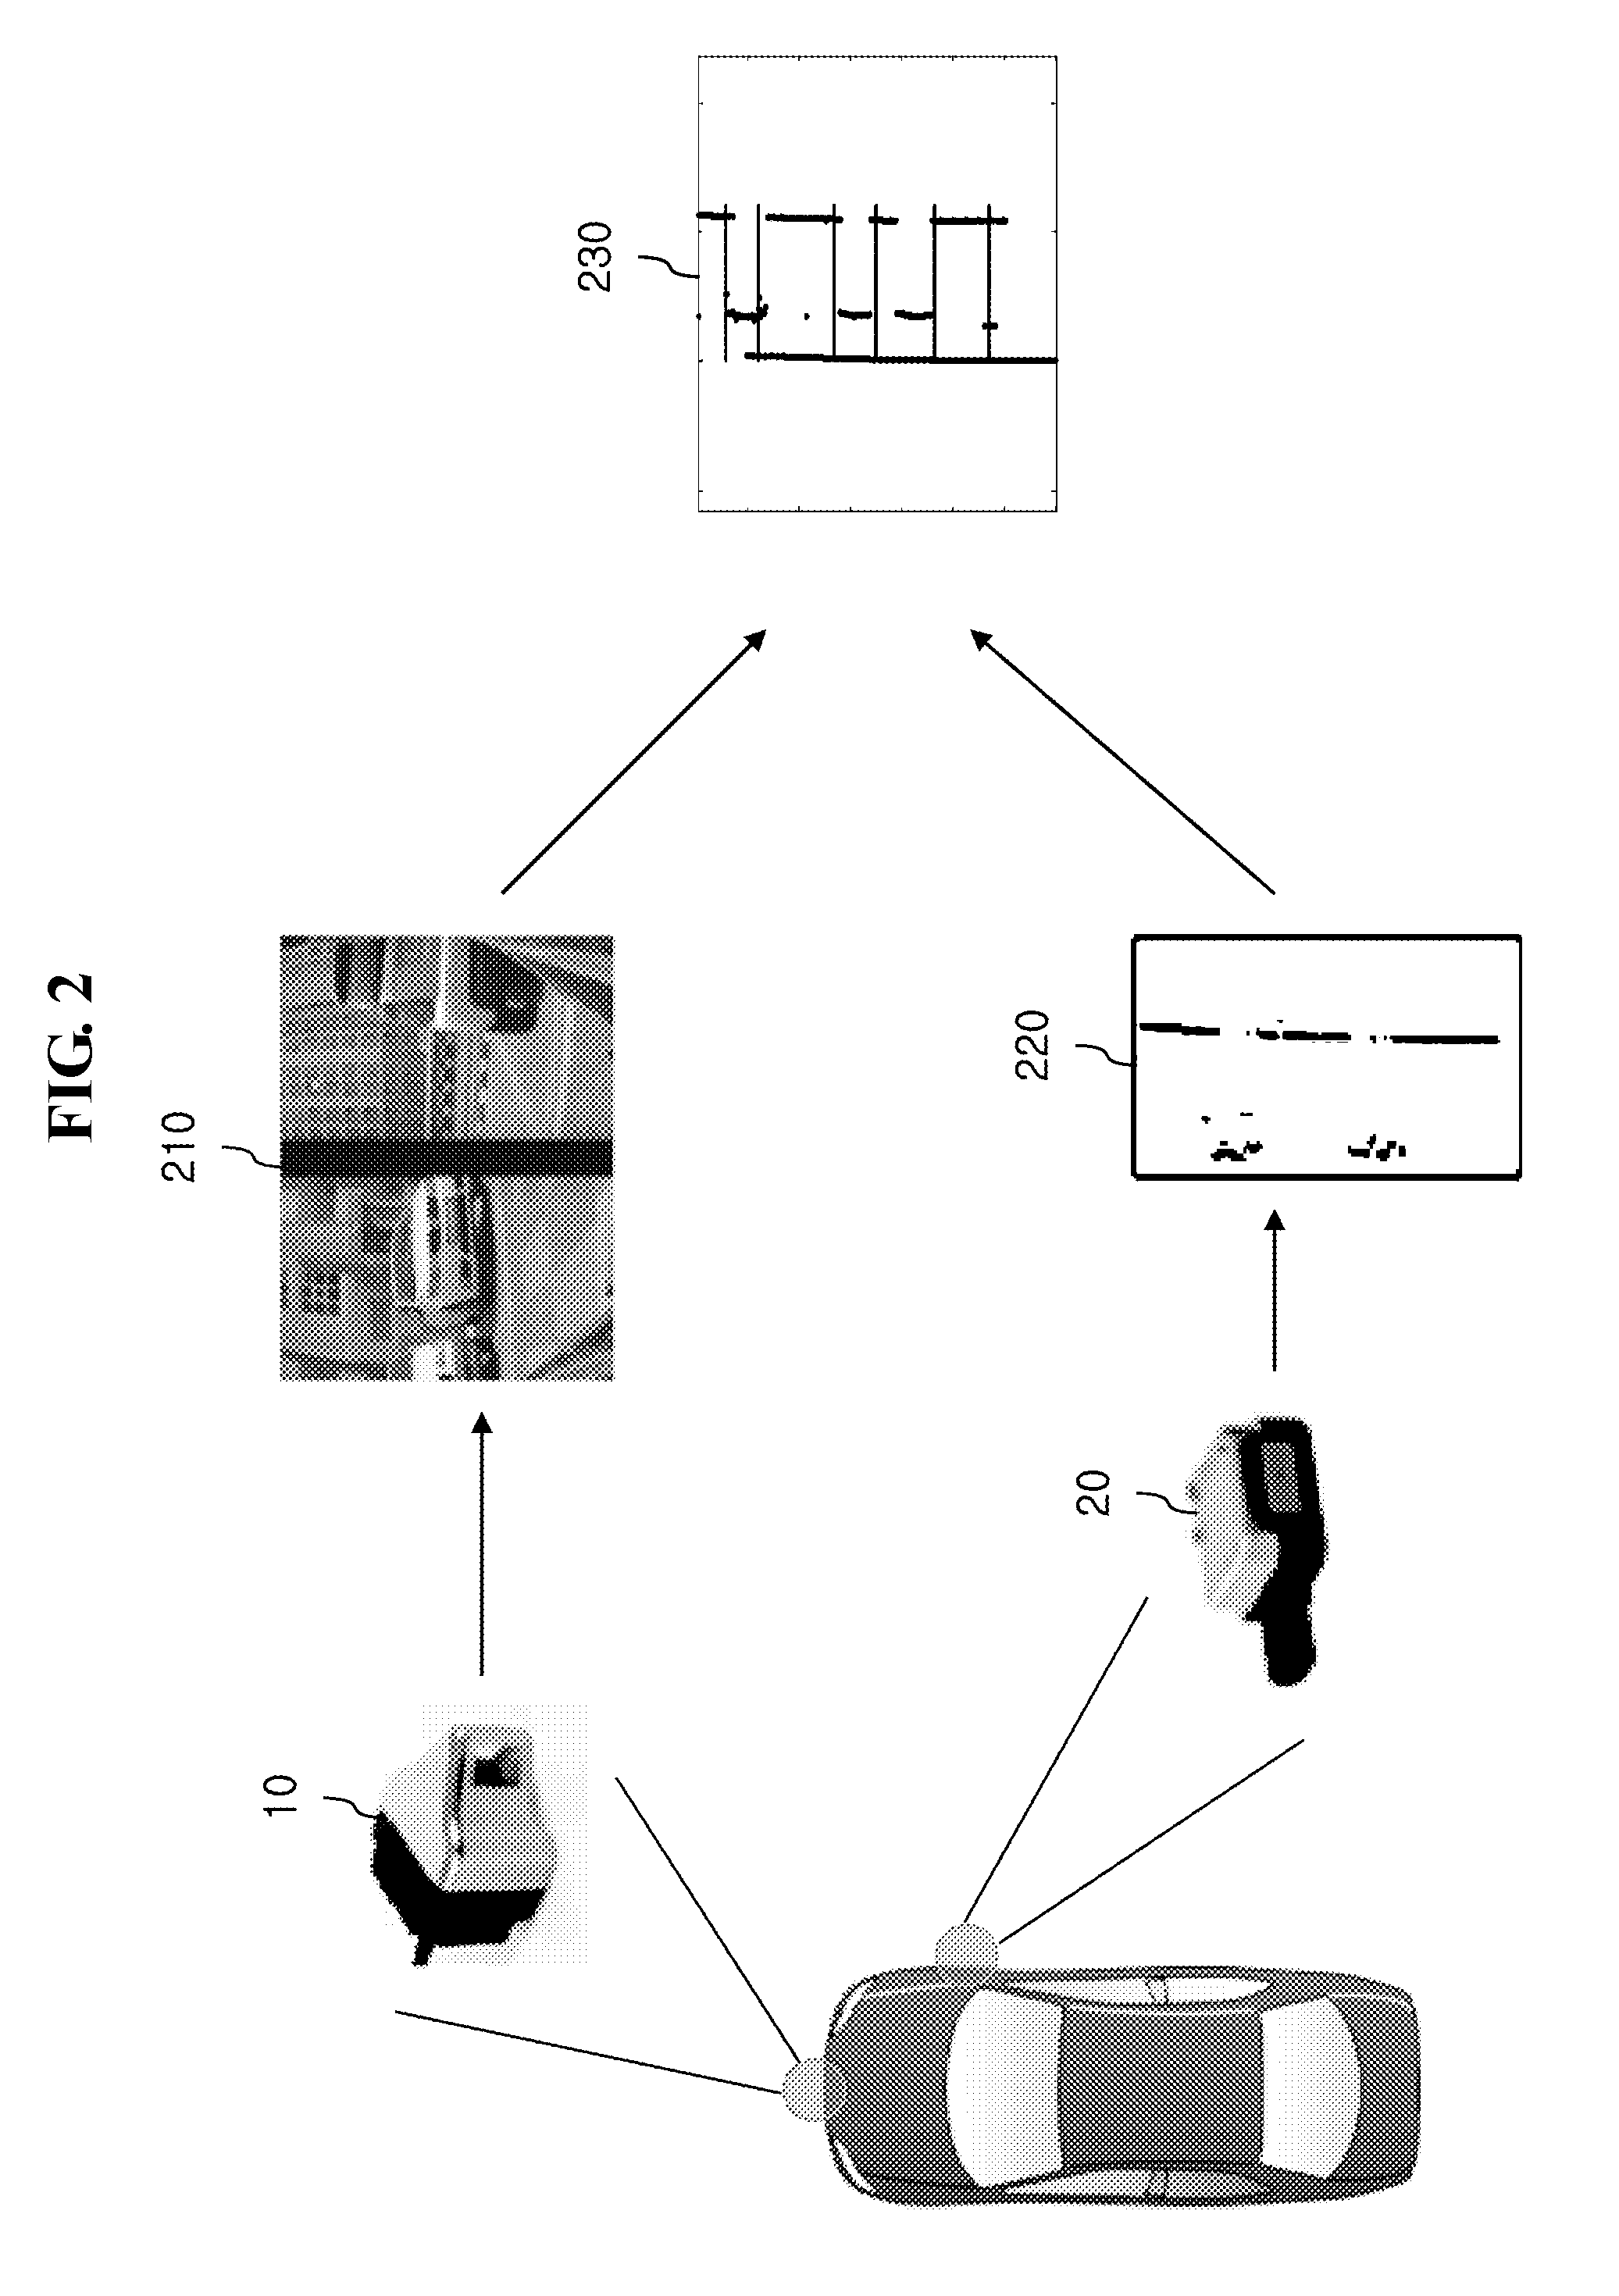 Method and system for recognizing parking lot